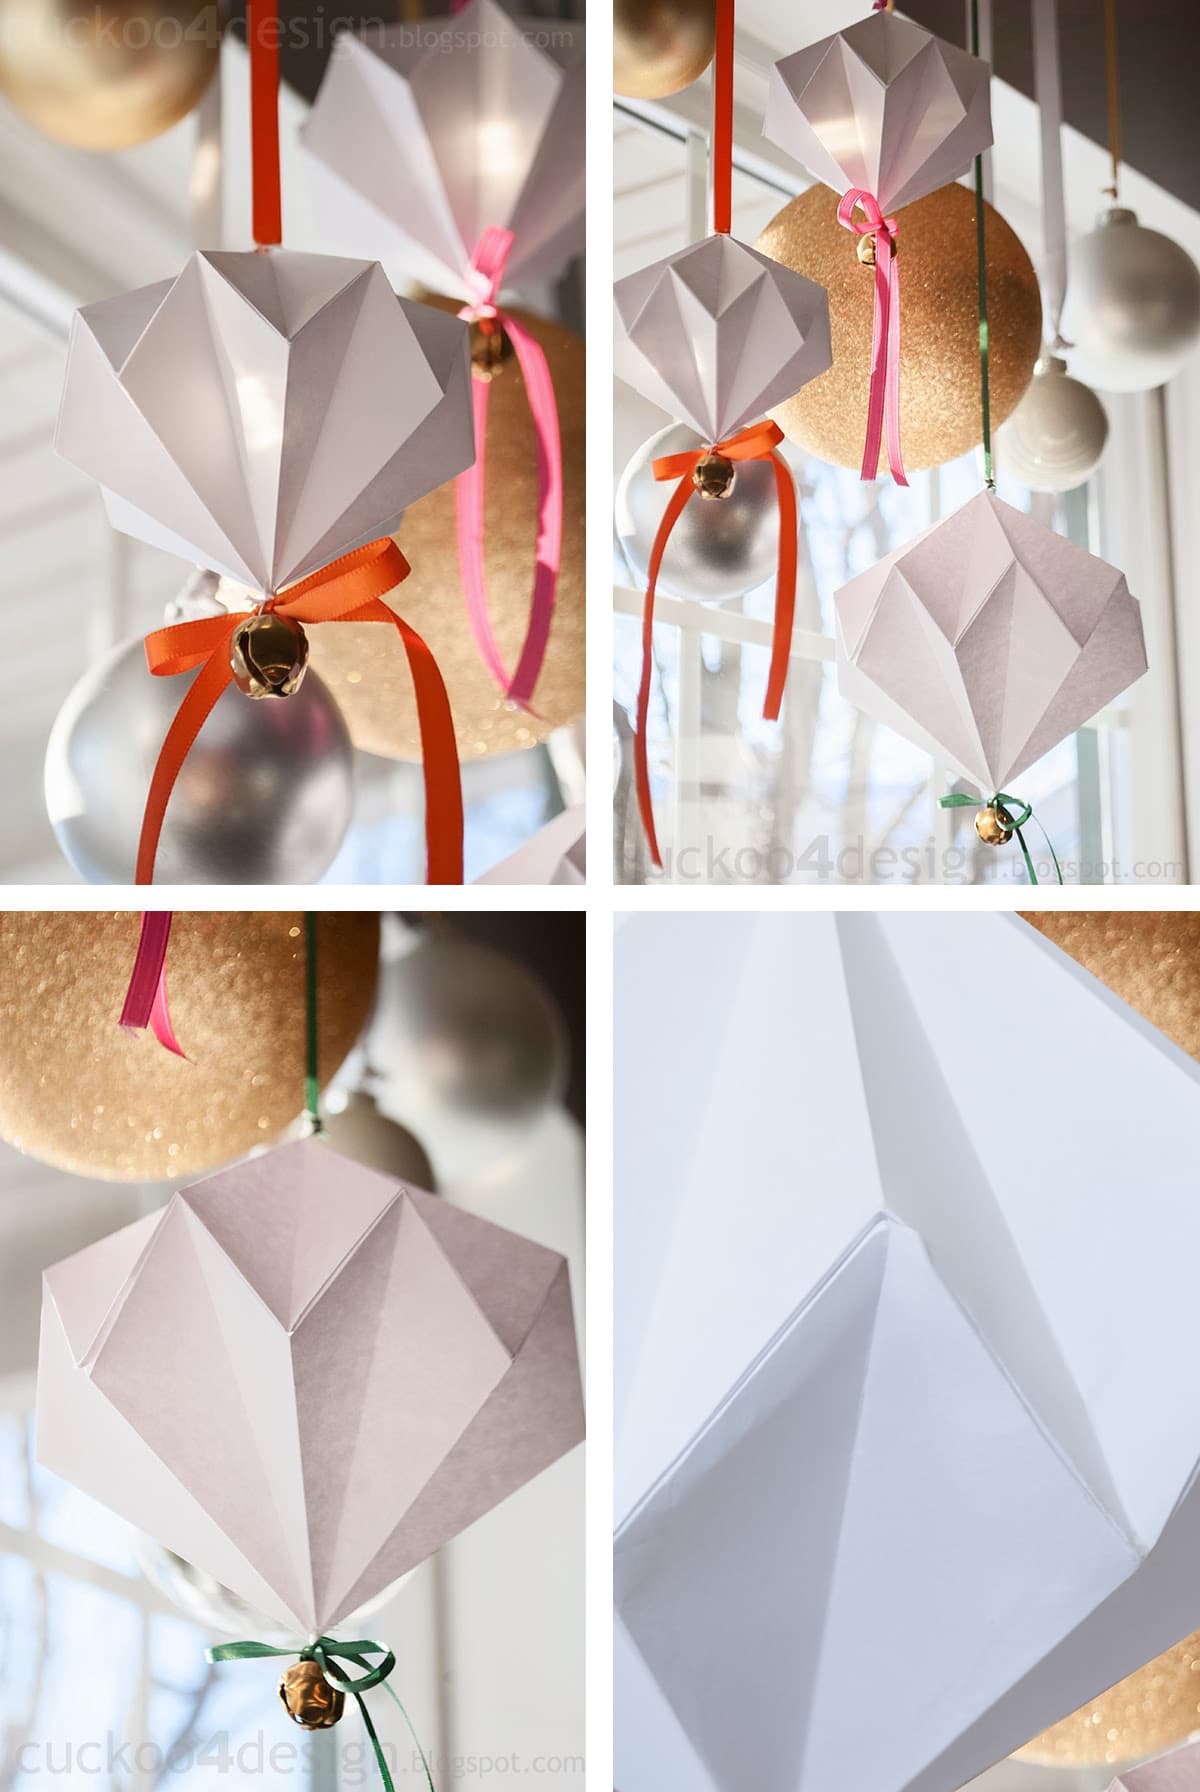 paper diamond oragami Christmas ornaments with gingelbells and ribbons hanging on curtain rod